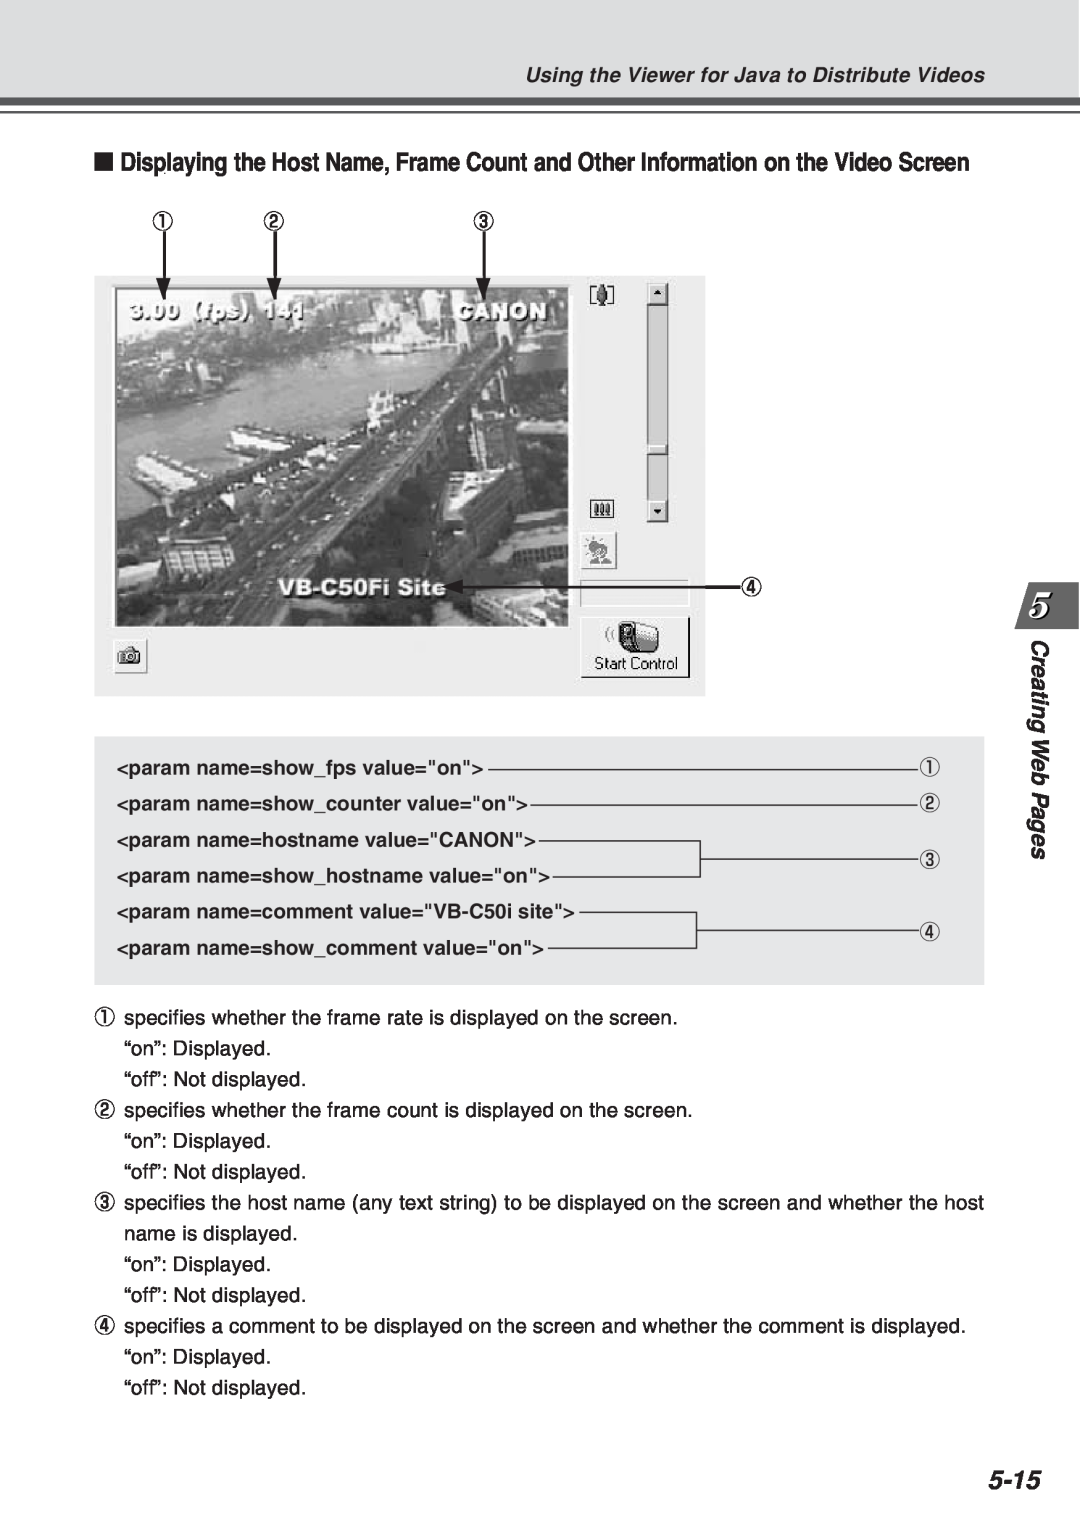 Canon Vb-C50fi user manual 5-15, Creating Web Pages, Using the Viewer for Java to Distribute Videos, “off”: Not displayed 